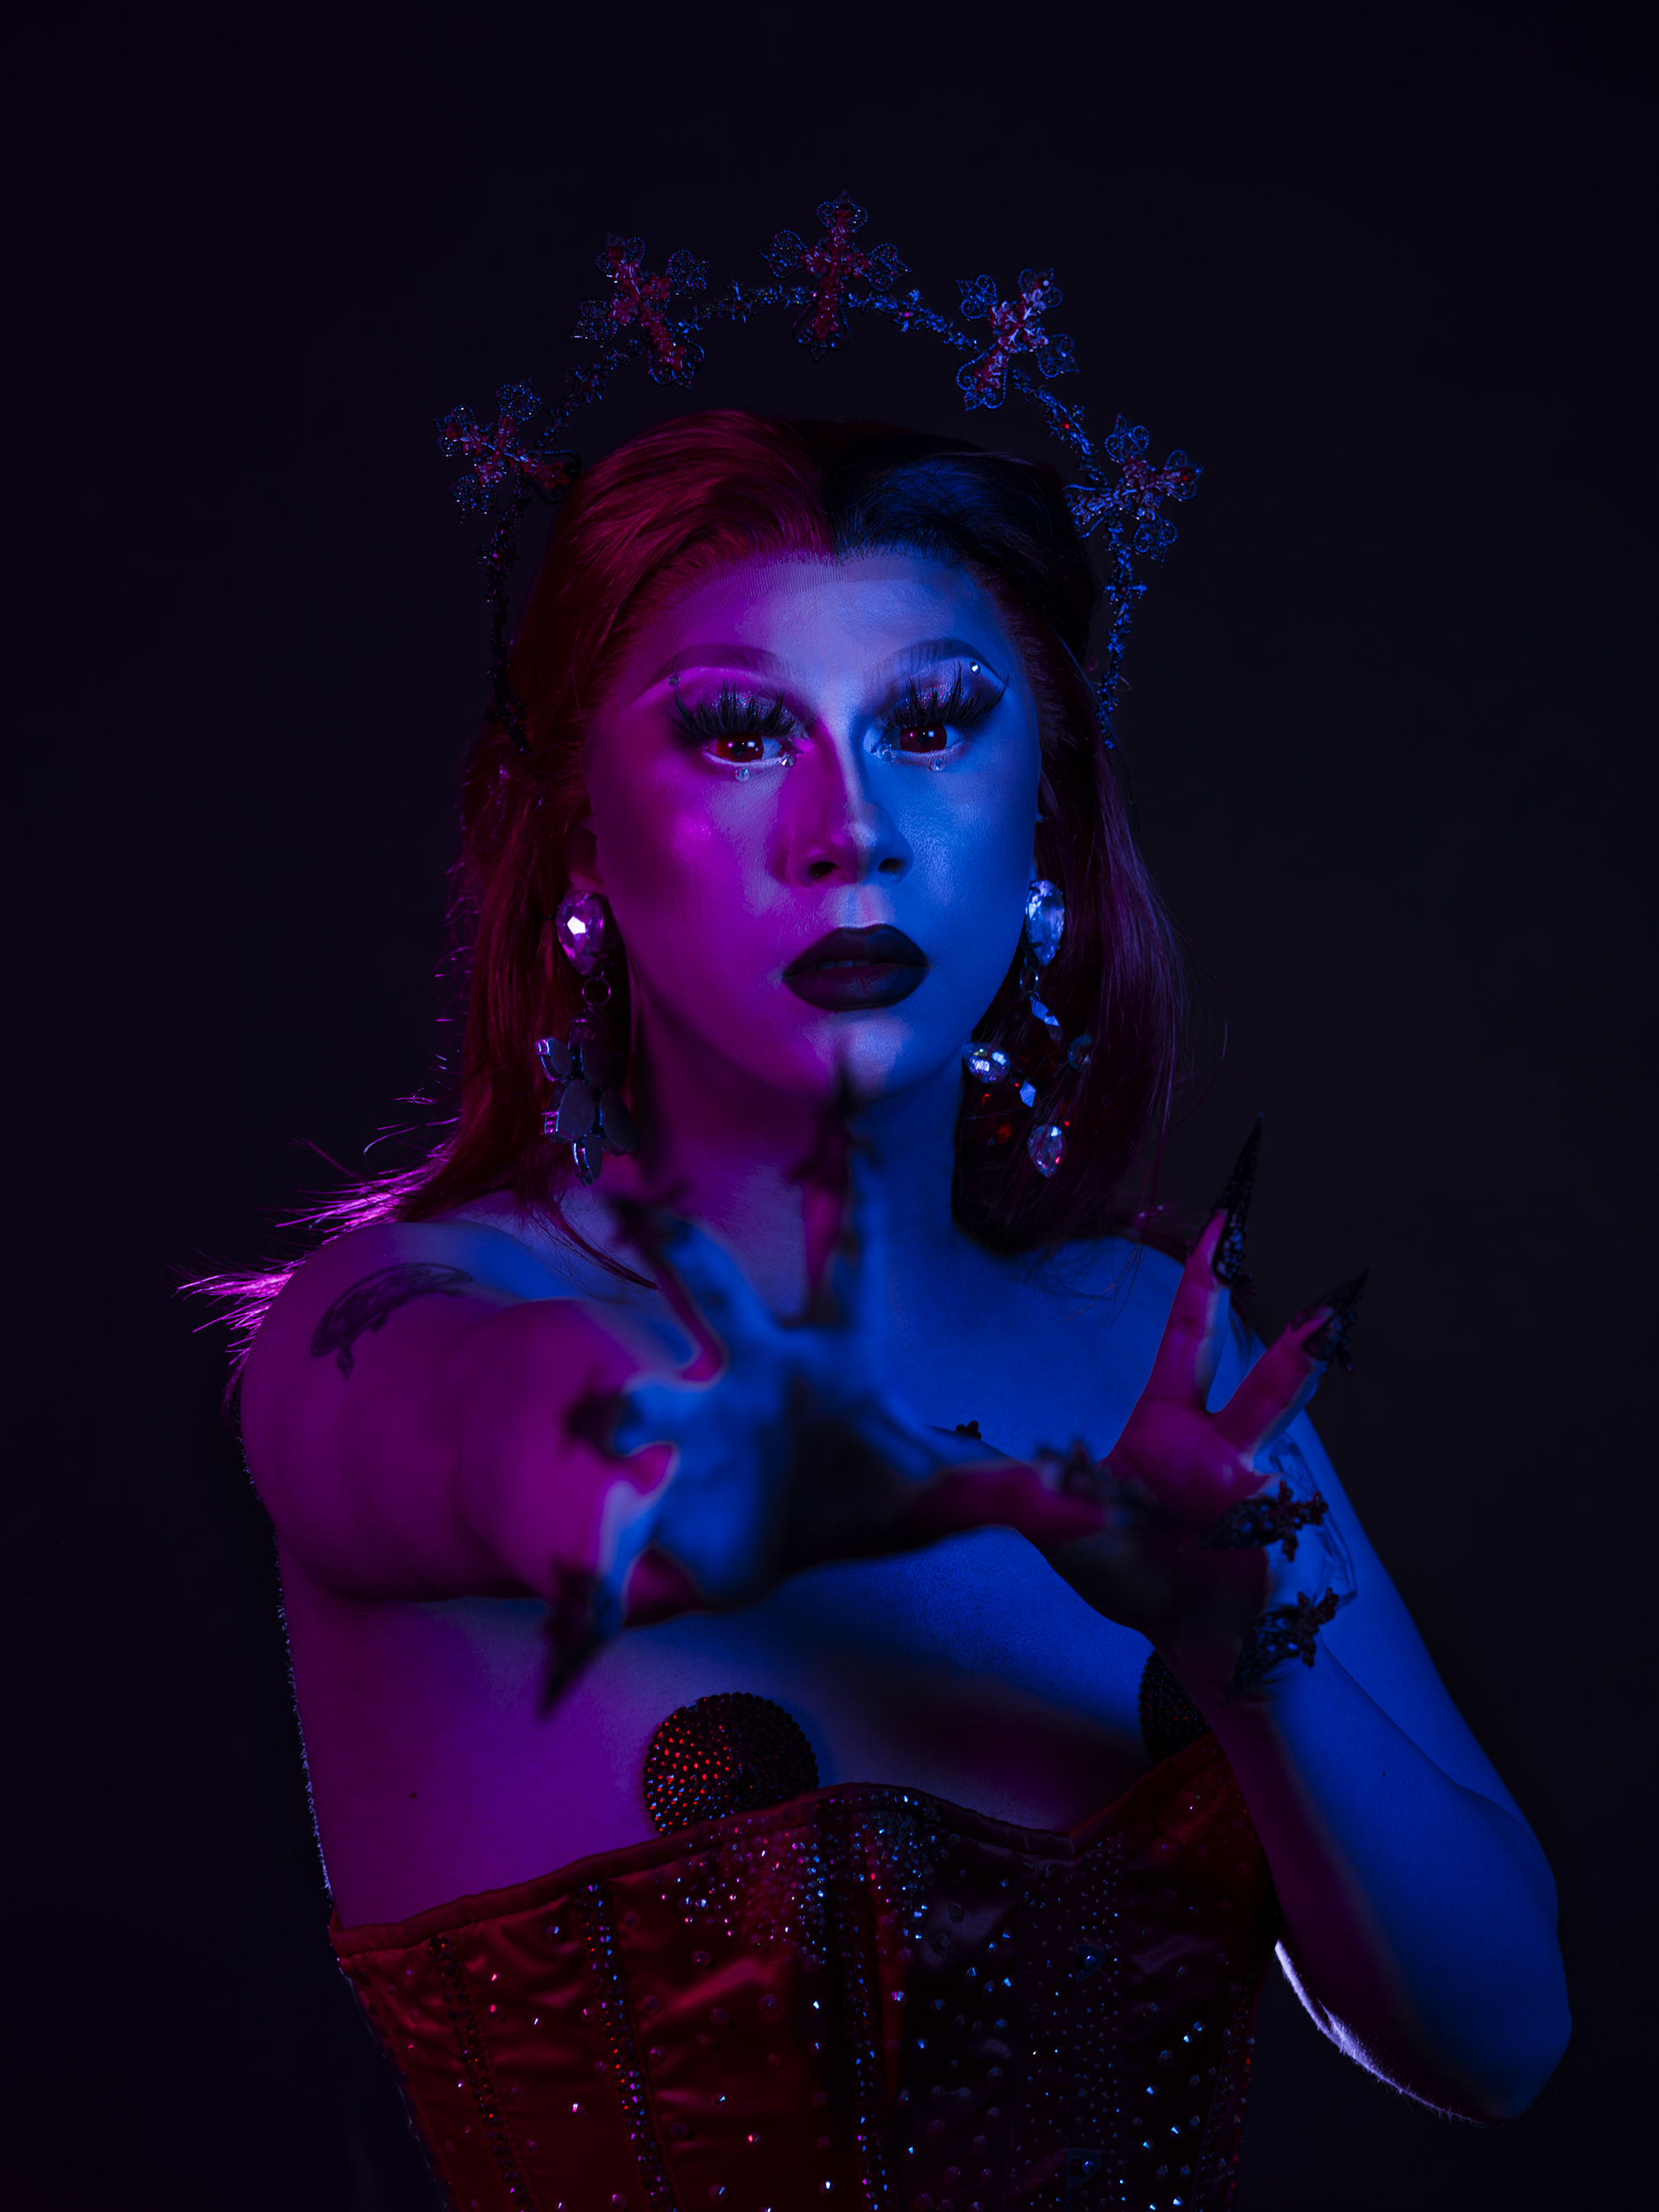 BA Photography work by Micha Hollis showing a portrait of drag artist Isla White. The lighting is multi-coloured with pink on the left and blue on the right.